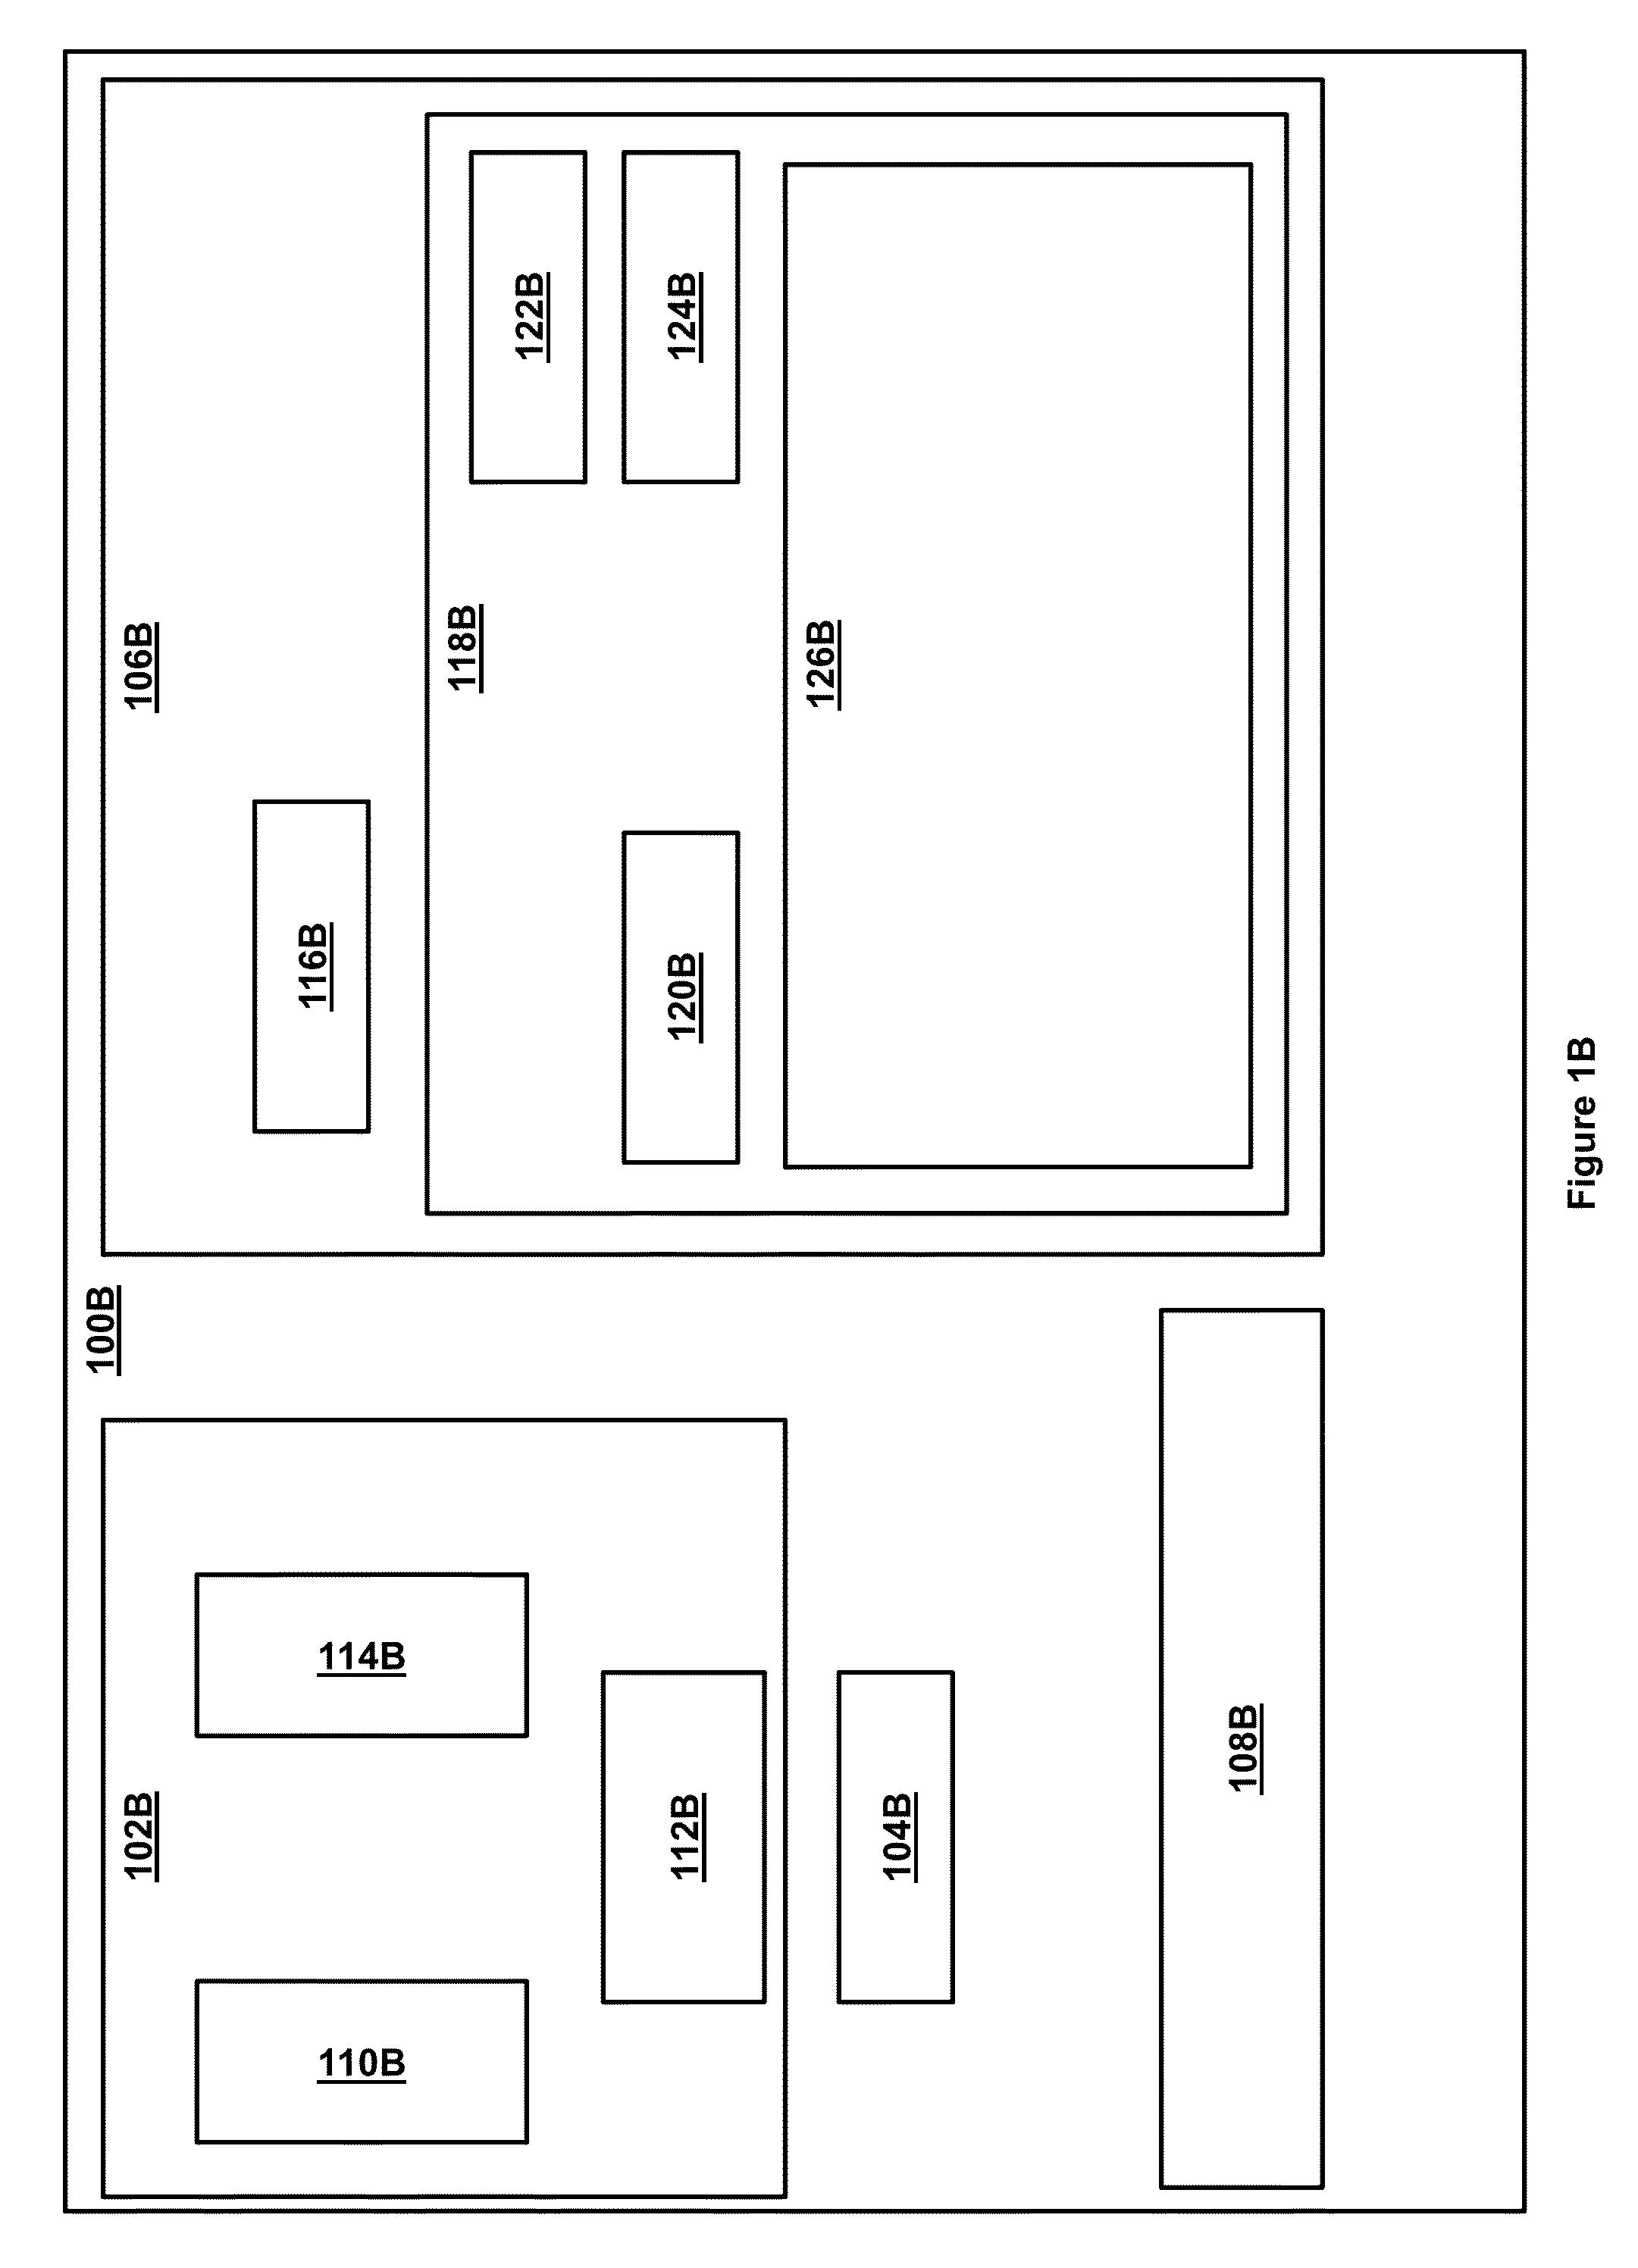 Method and system for managing and quantifying sun exposure